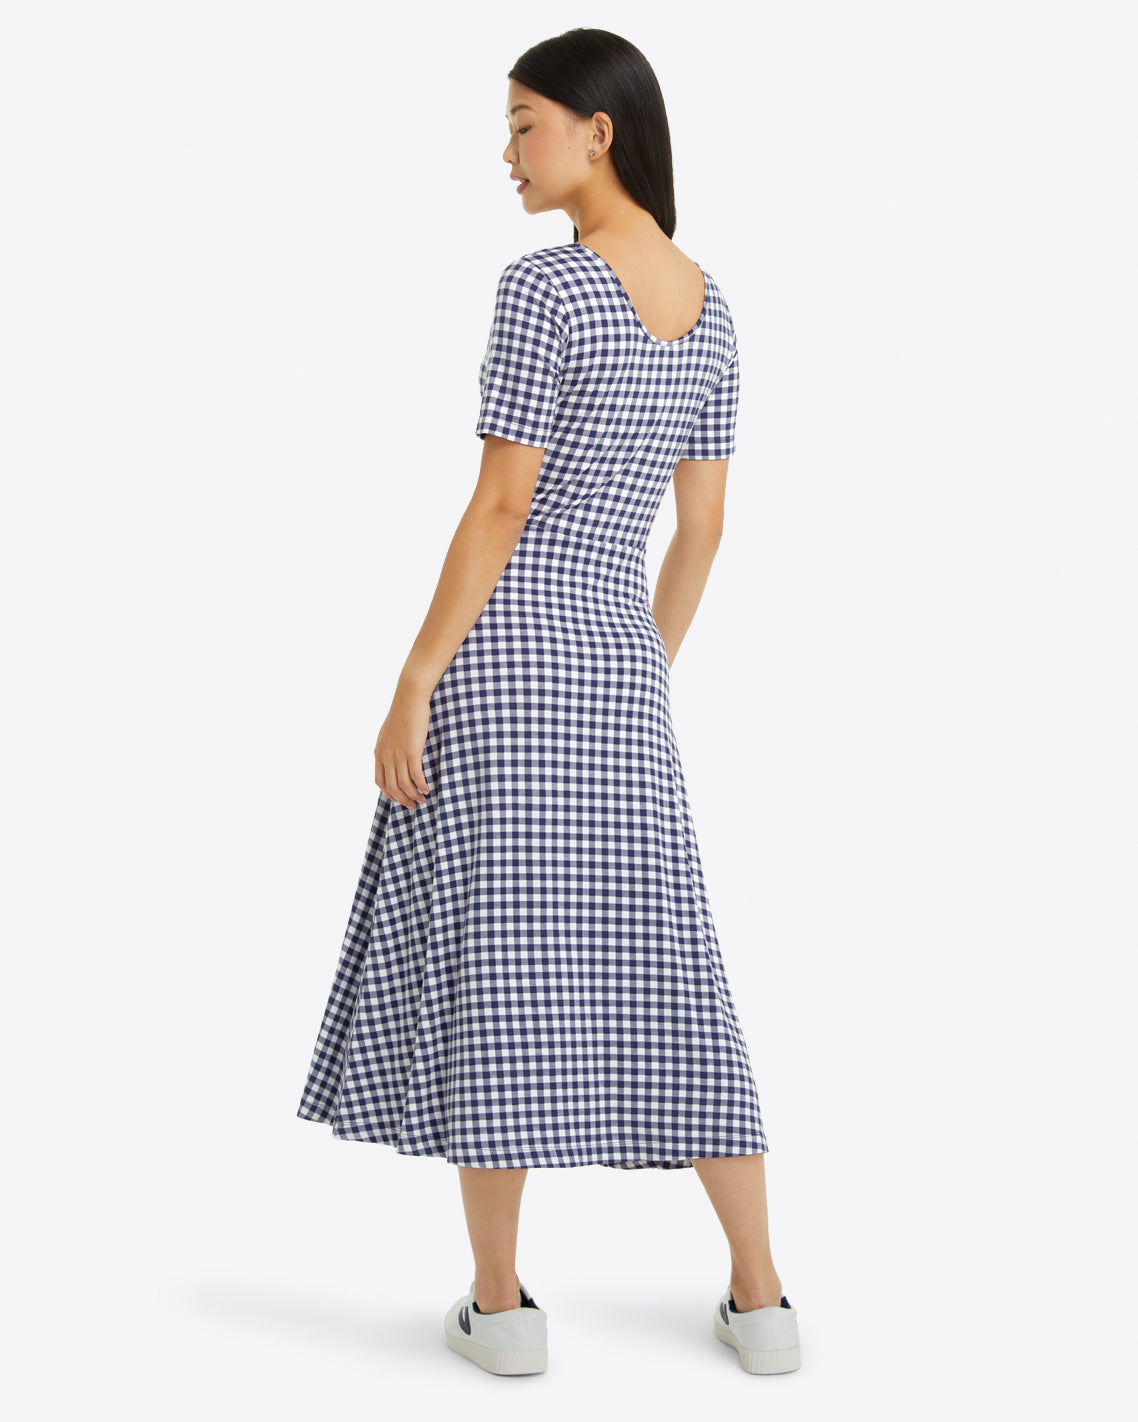 Tammy T-Shirt Dress in Gingham